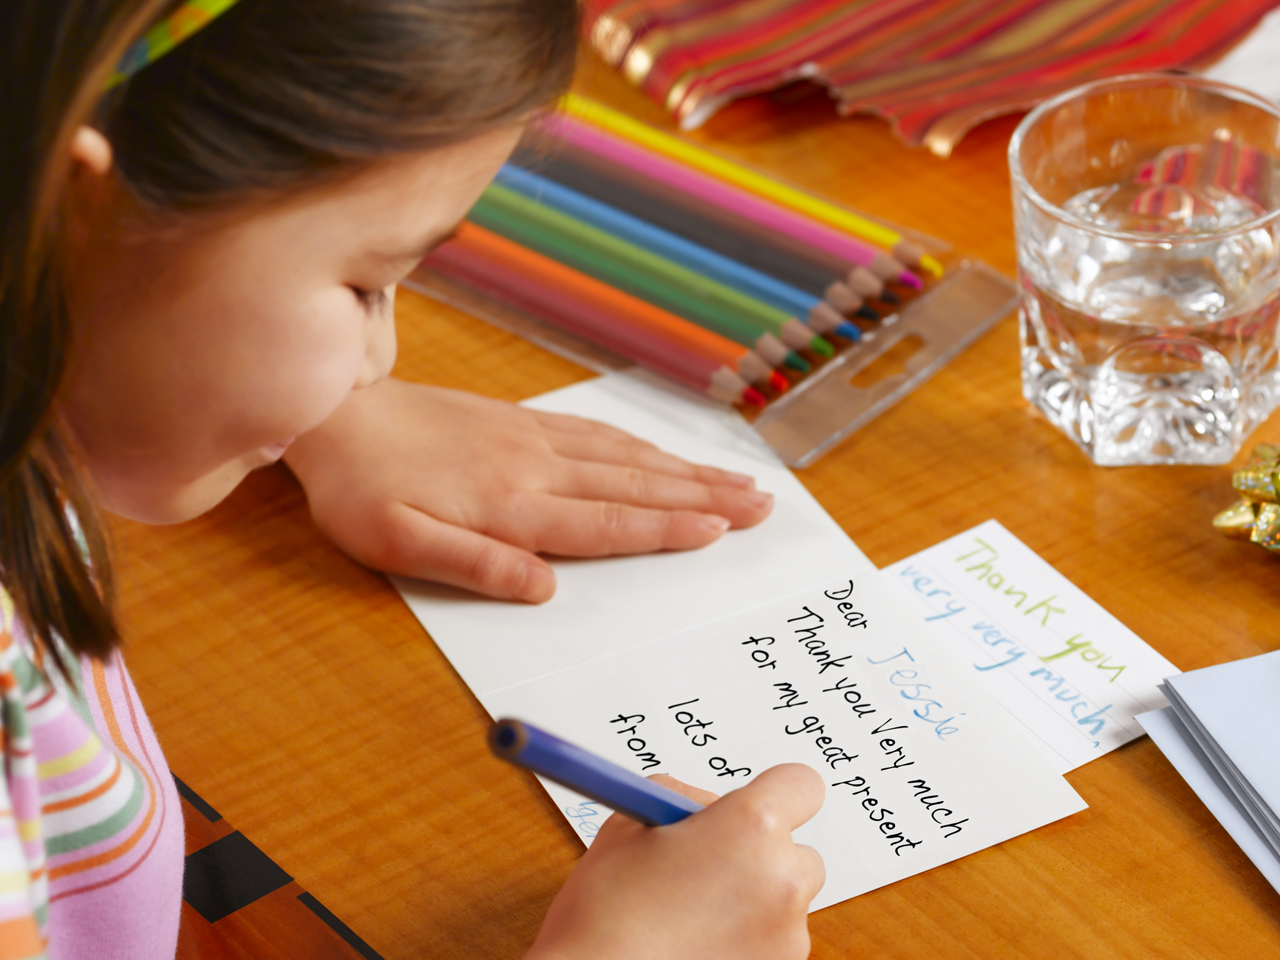 Should kids be forced to write thank-you notes?